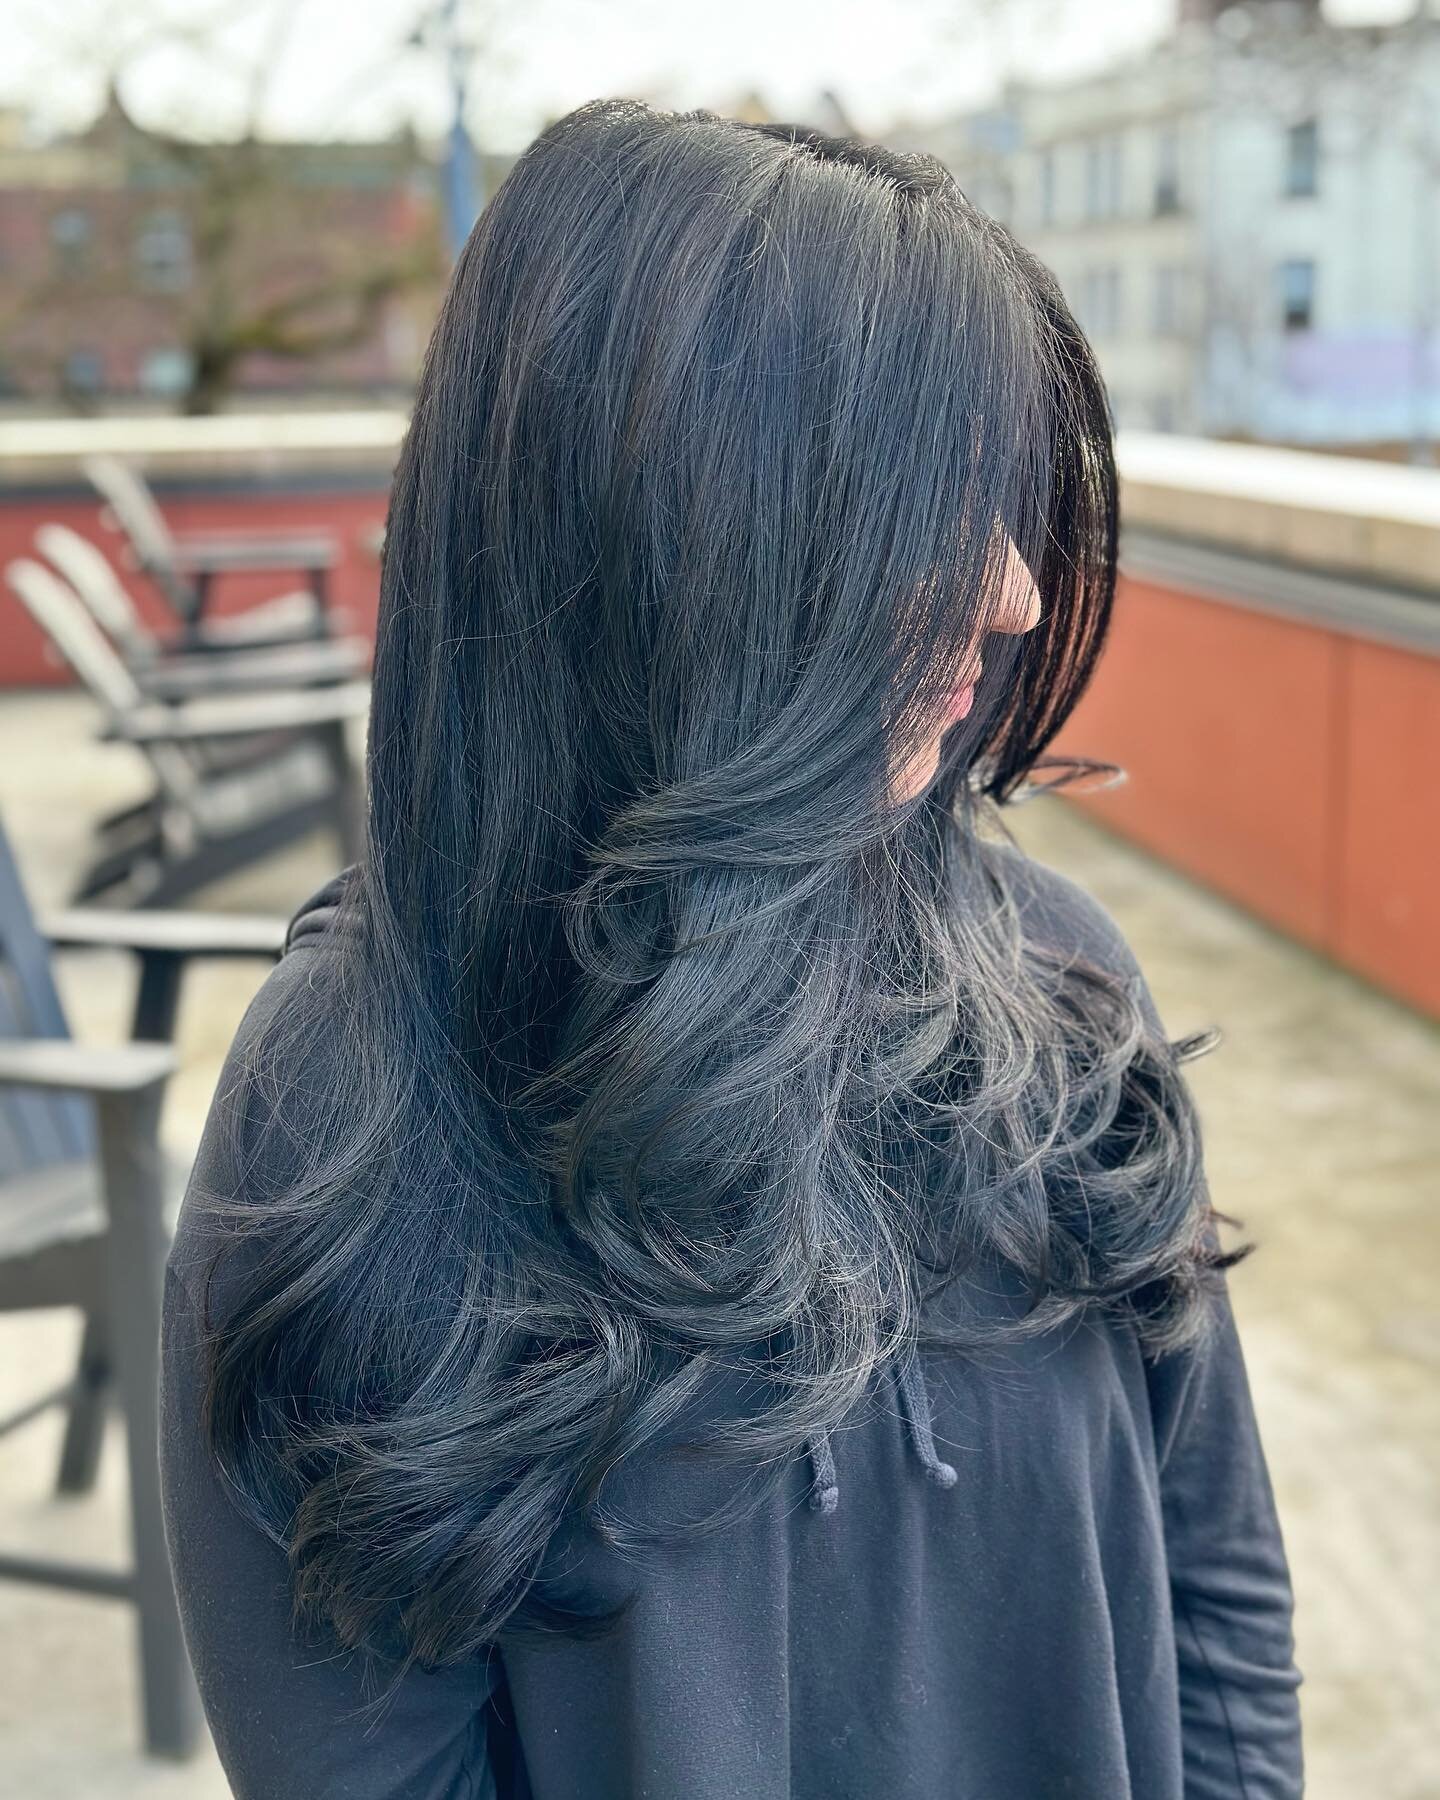 Another brunette hottie 🥵 we did a fresh color, cut and k18 treatment 😍 another mermaid with a ton of hair 🧜🏼&zwj;♀️ 🌸
🌸
🌸
🌸
#thickhair #mermaidhair #seattlesalon #seattlehairstylist #seattlehair #seattlehairstylist #k18 #k18results #caphills